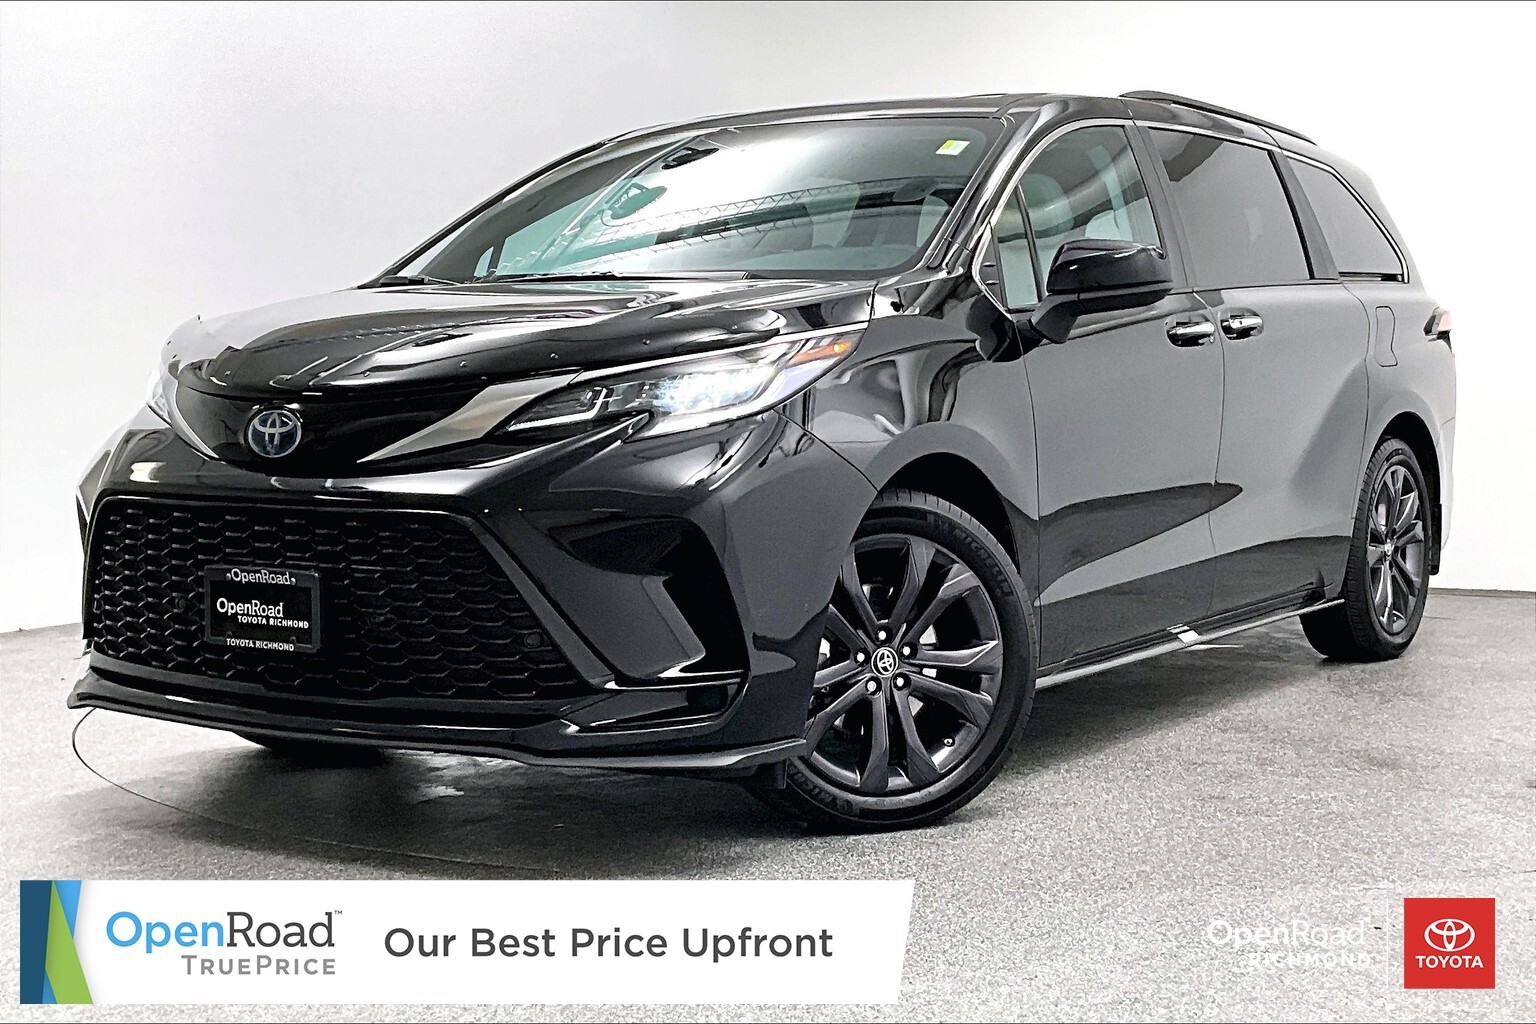 2021 Toyota Sienna Sienna Limited AWD 7-Pass |LIMITED PACKAGE|